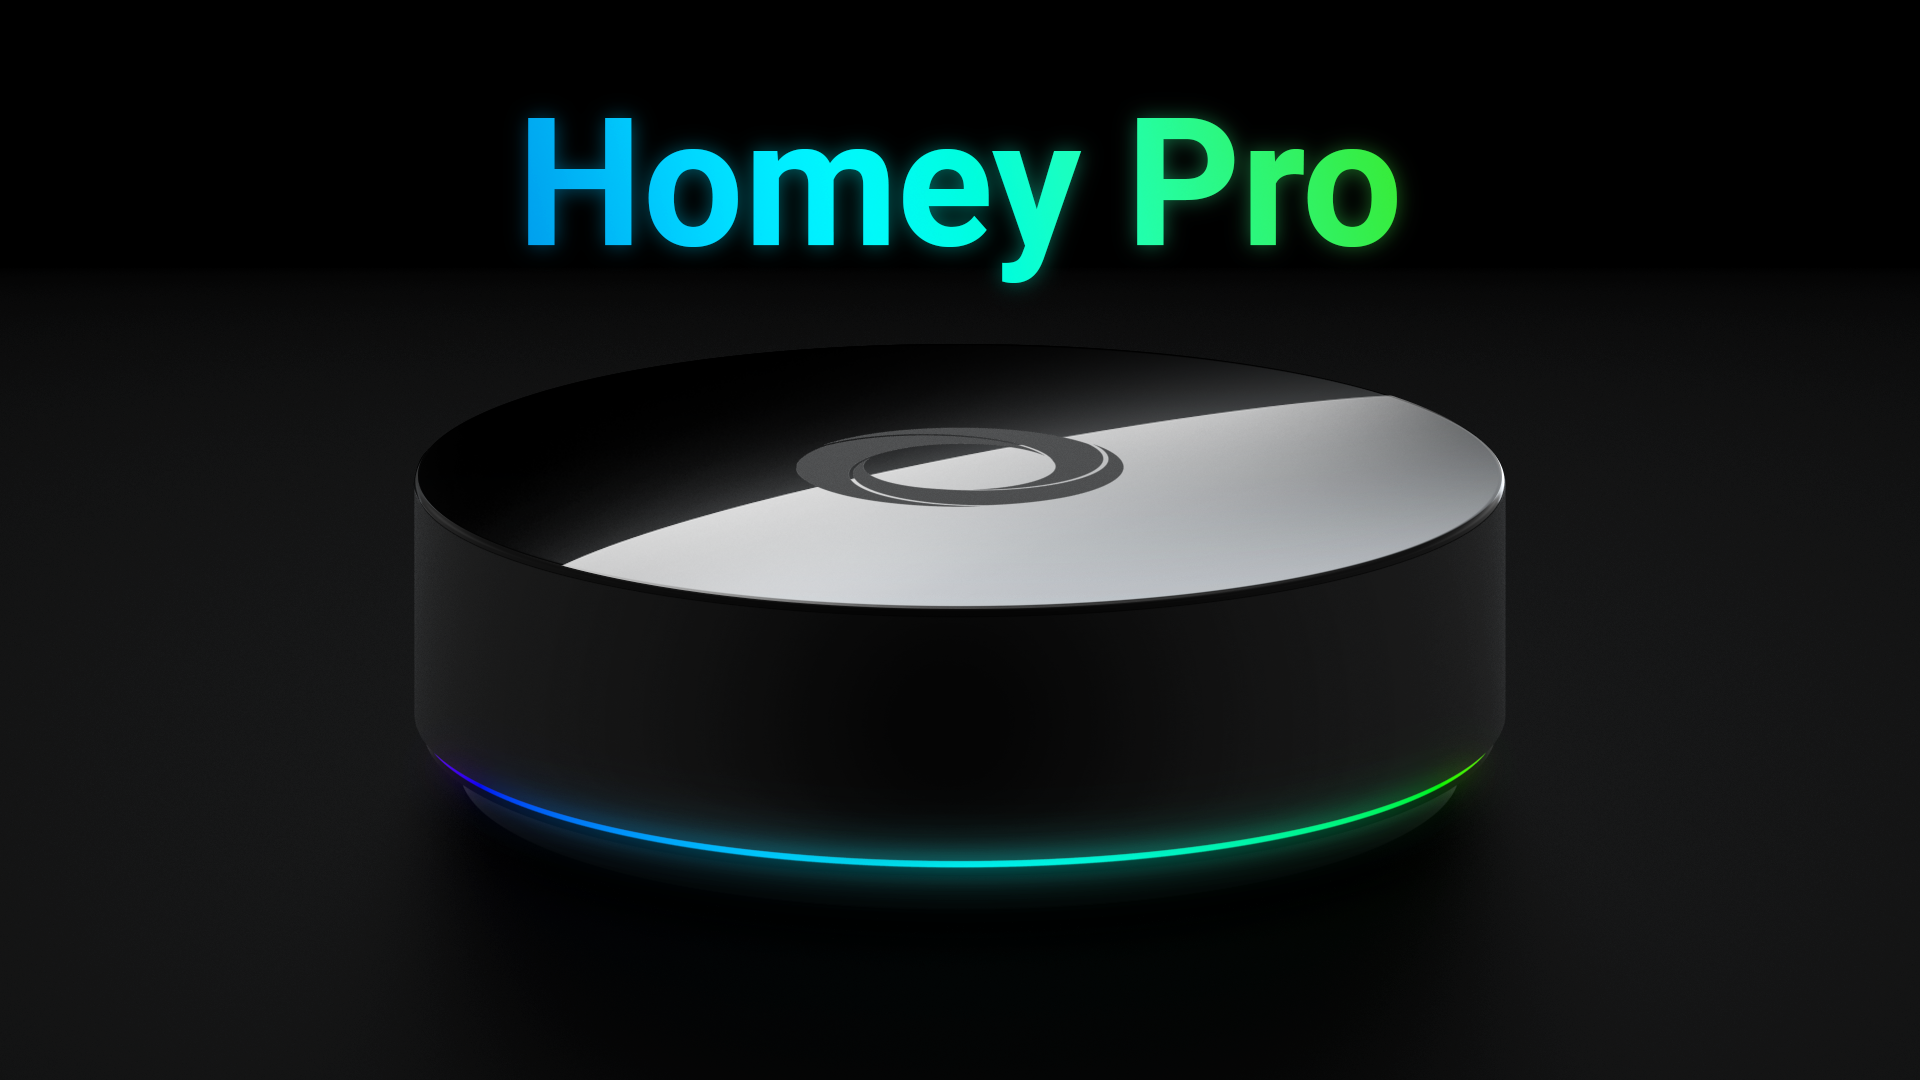 Introducing the all-new Homey Pro